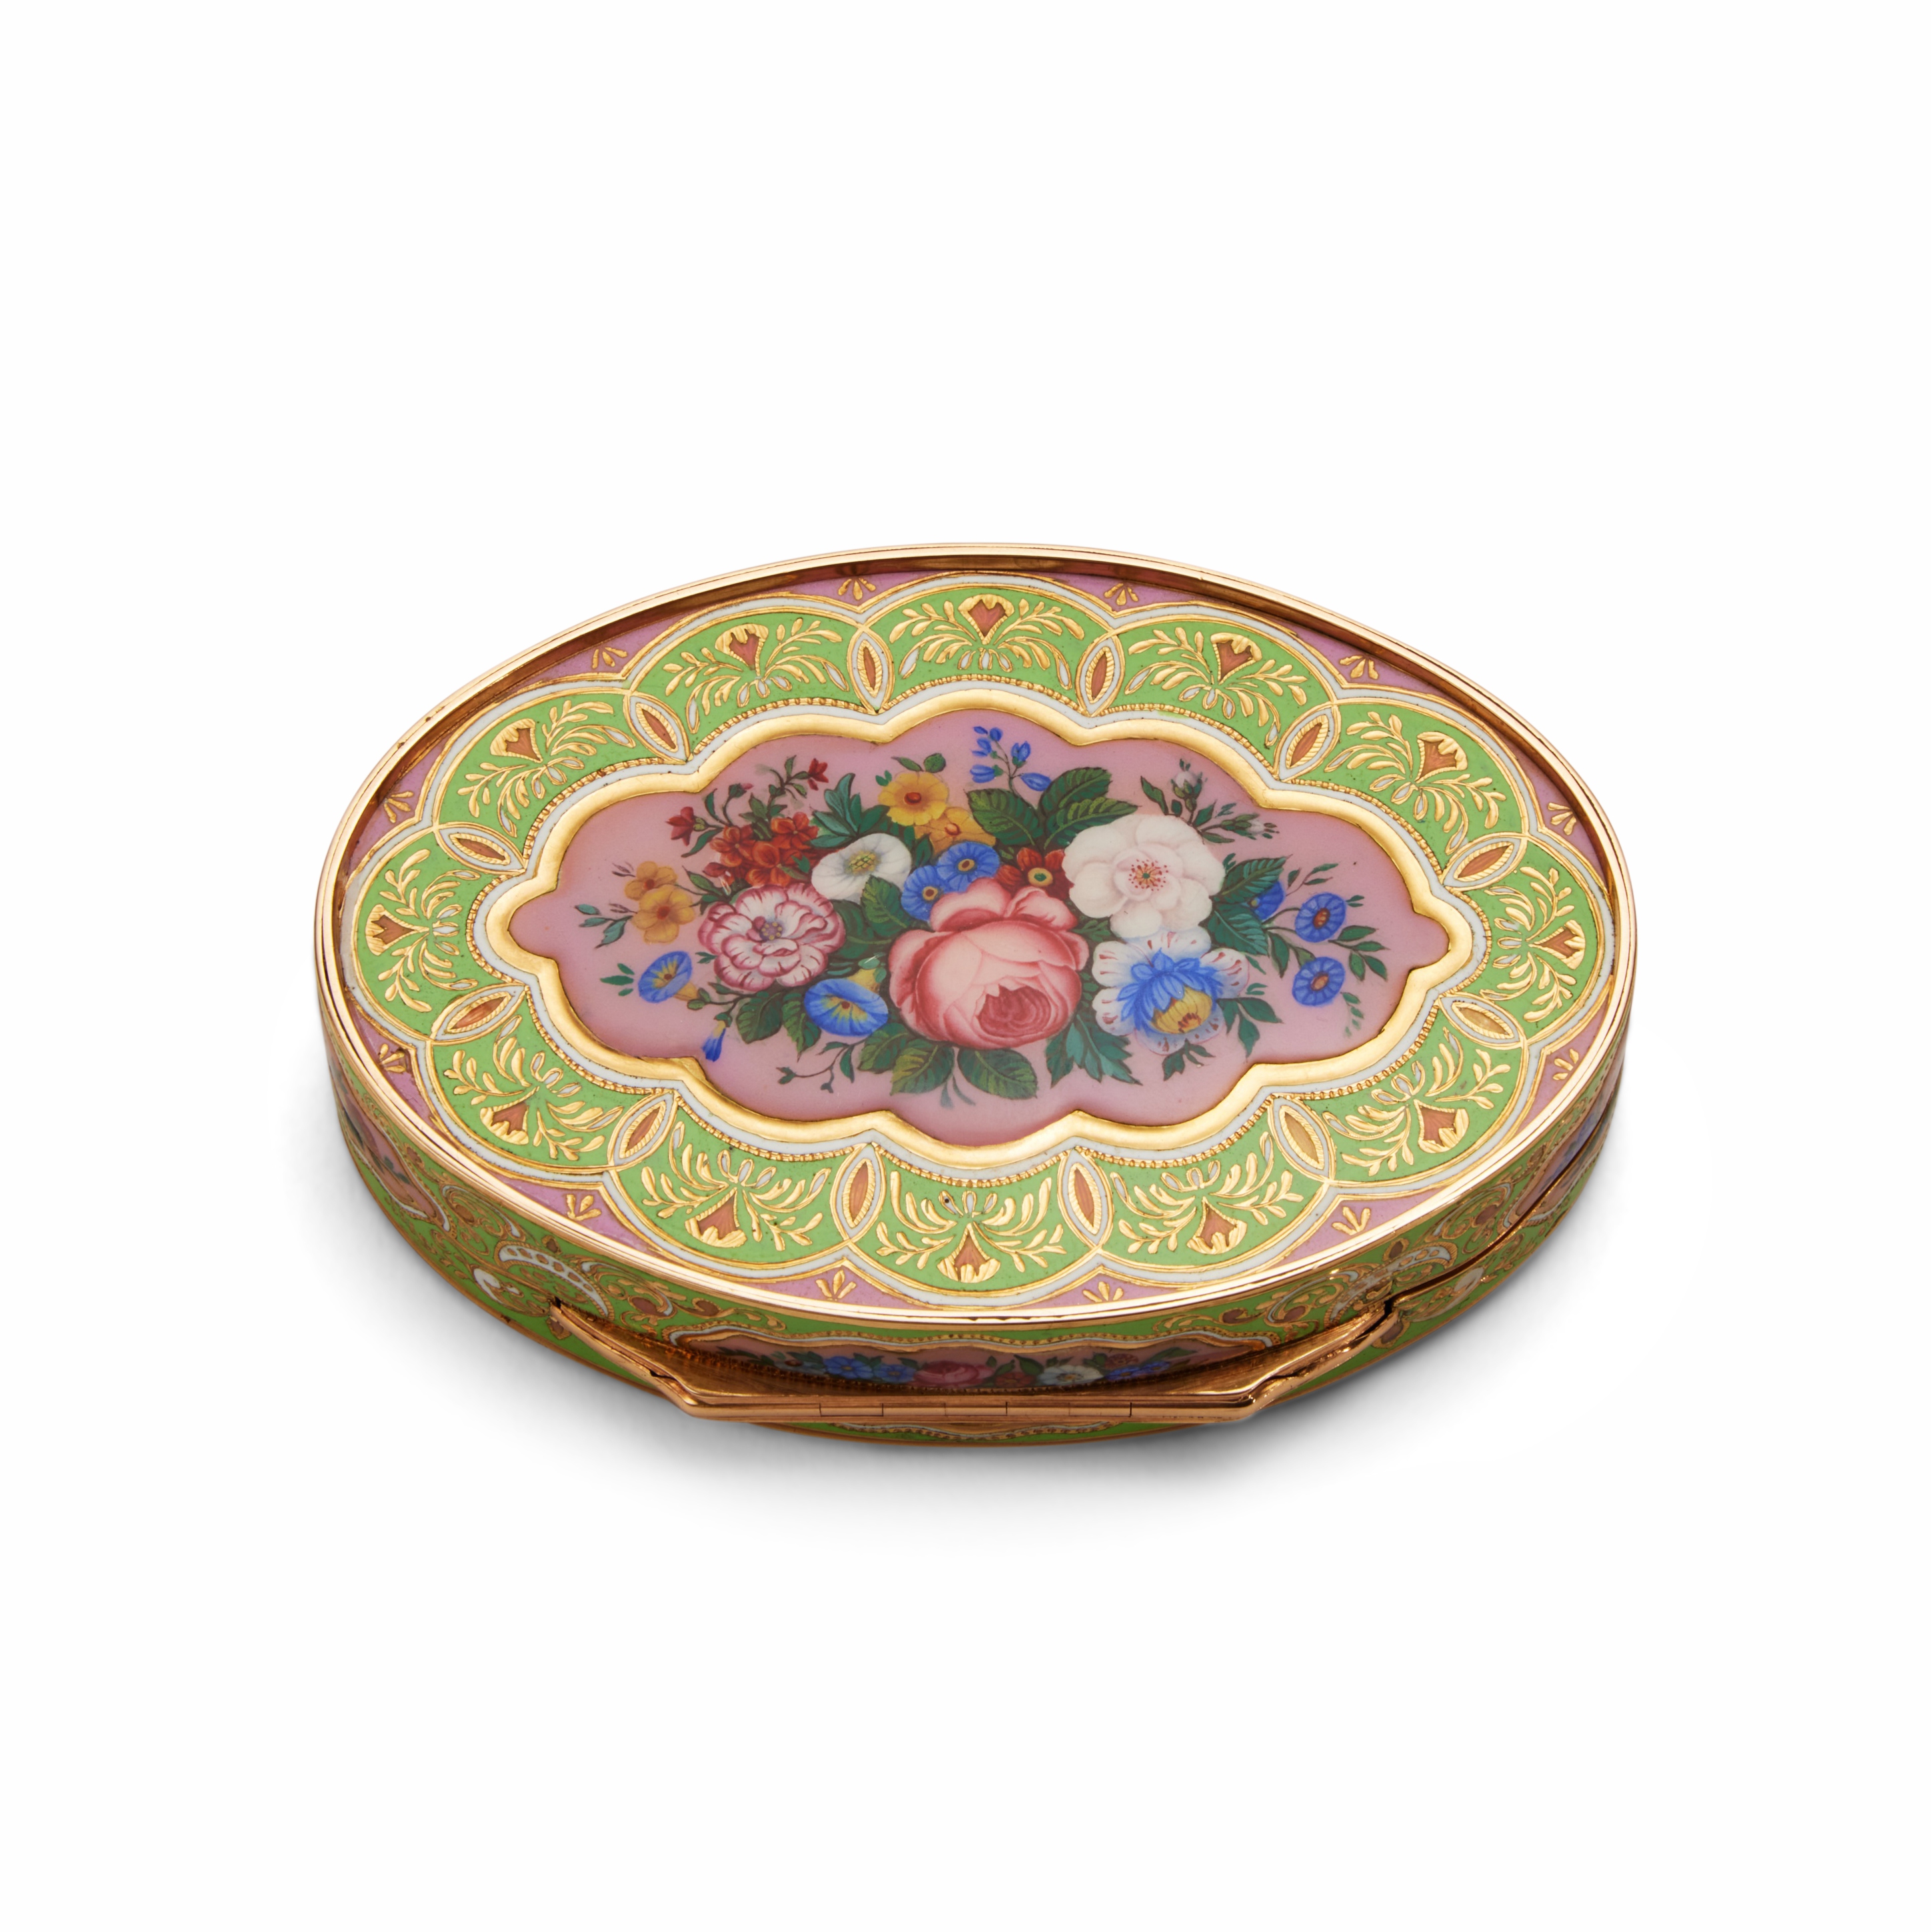 A Swiss Enameled Gold Snuff Box For The Turkish Market, Probably Geneva, Circa 1830 - Image 2 of 5